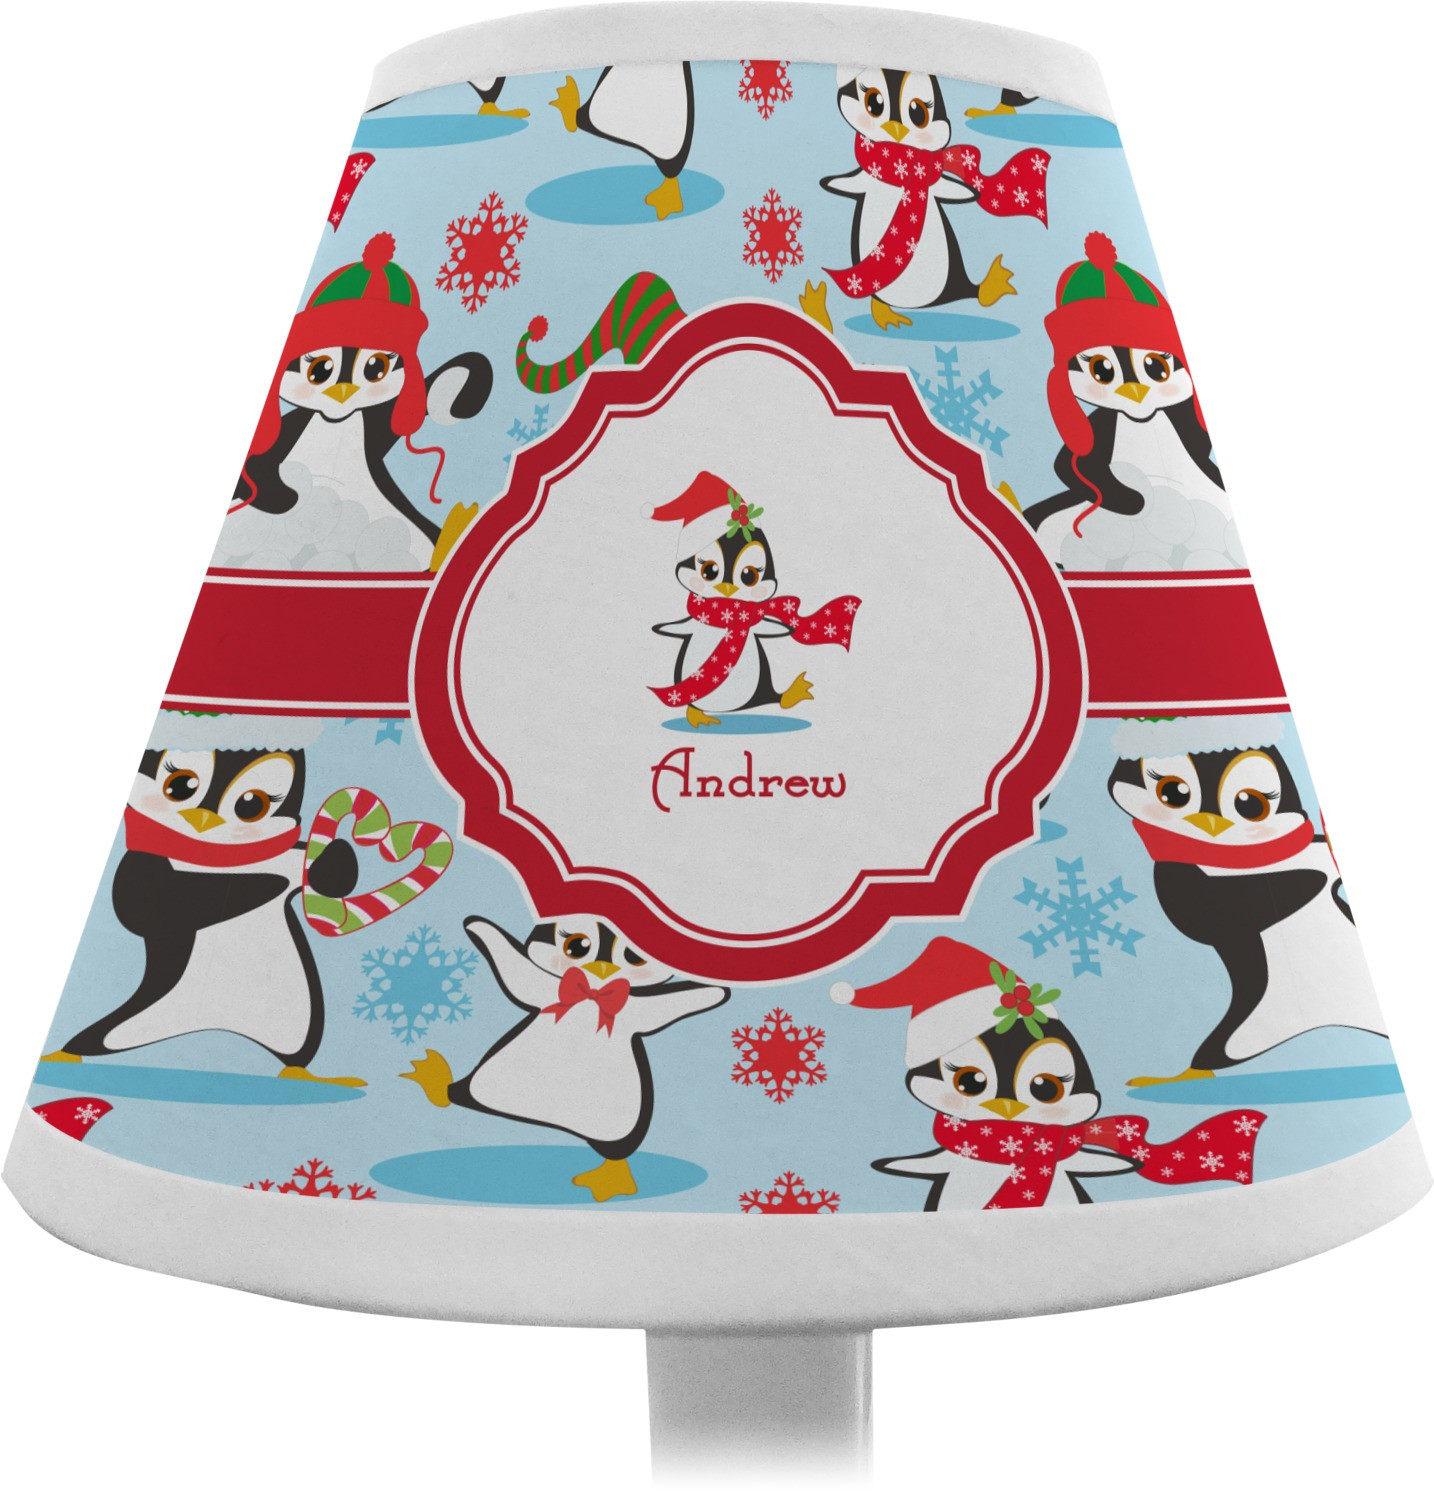 Christmas Chandelier Lamp Shades
 Christmas Penguins Chandelier Lamp Shade Personalized